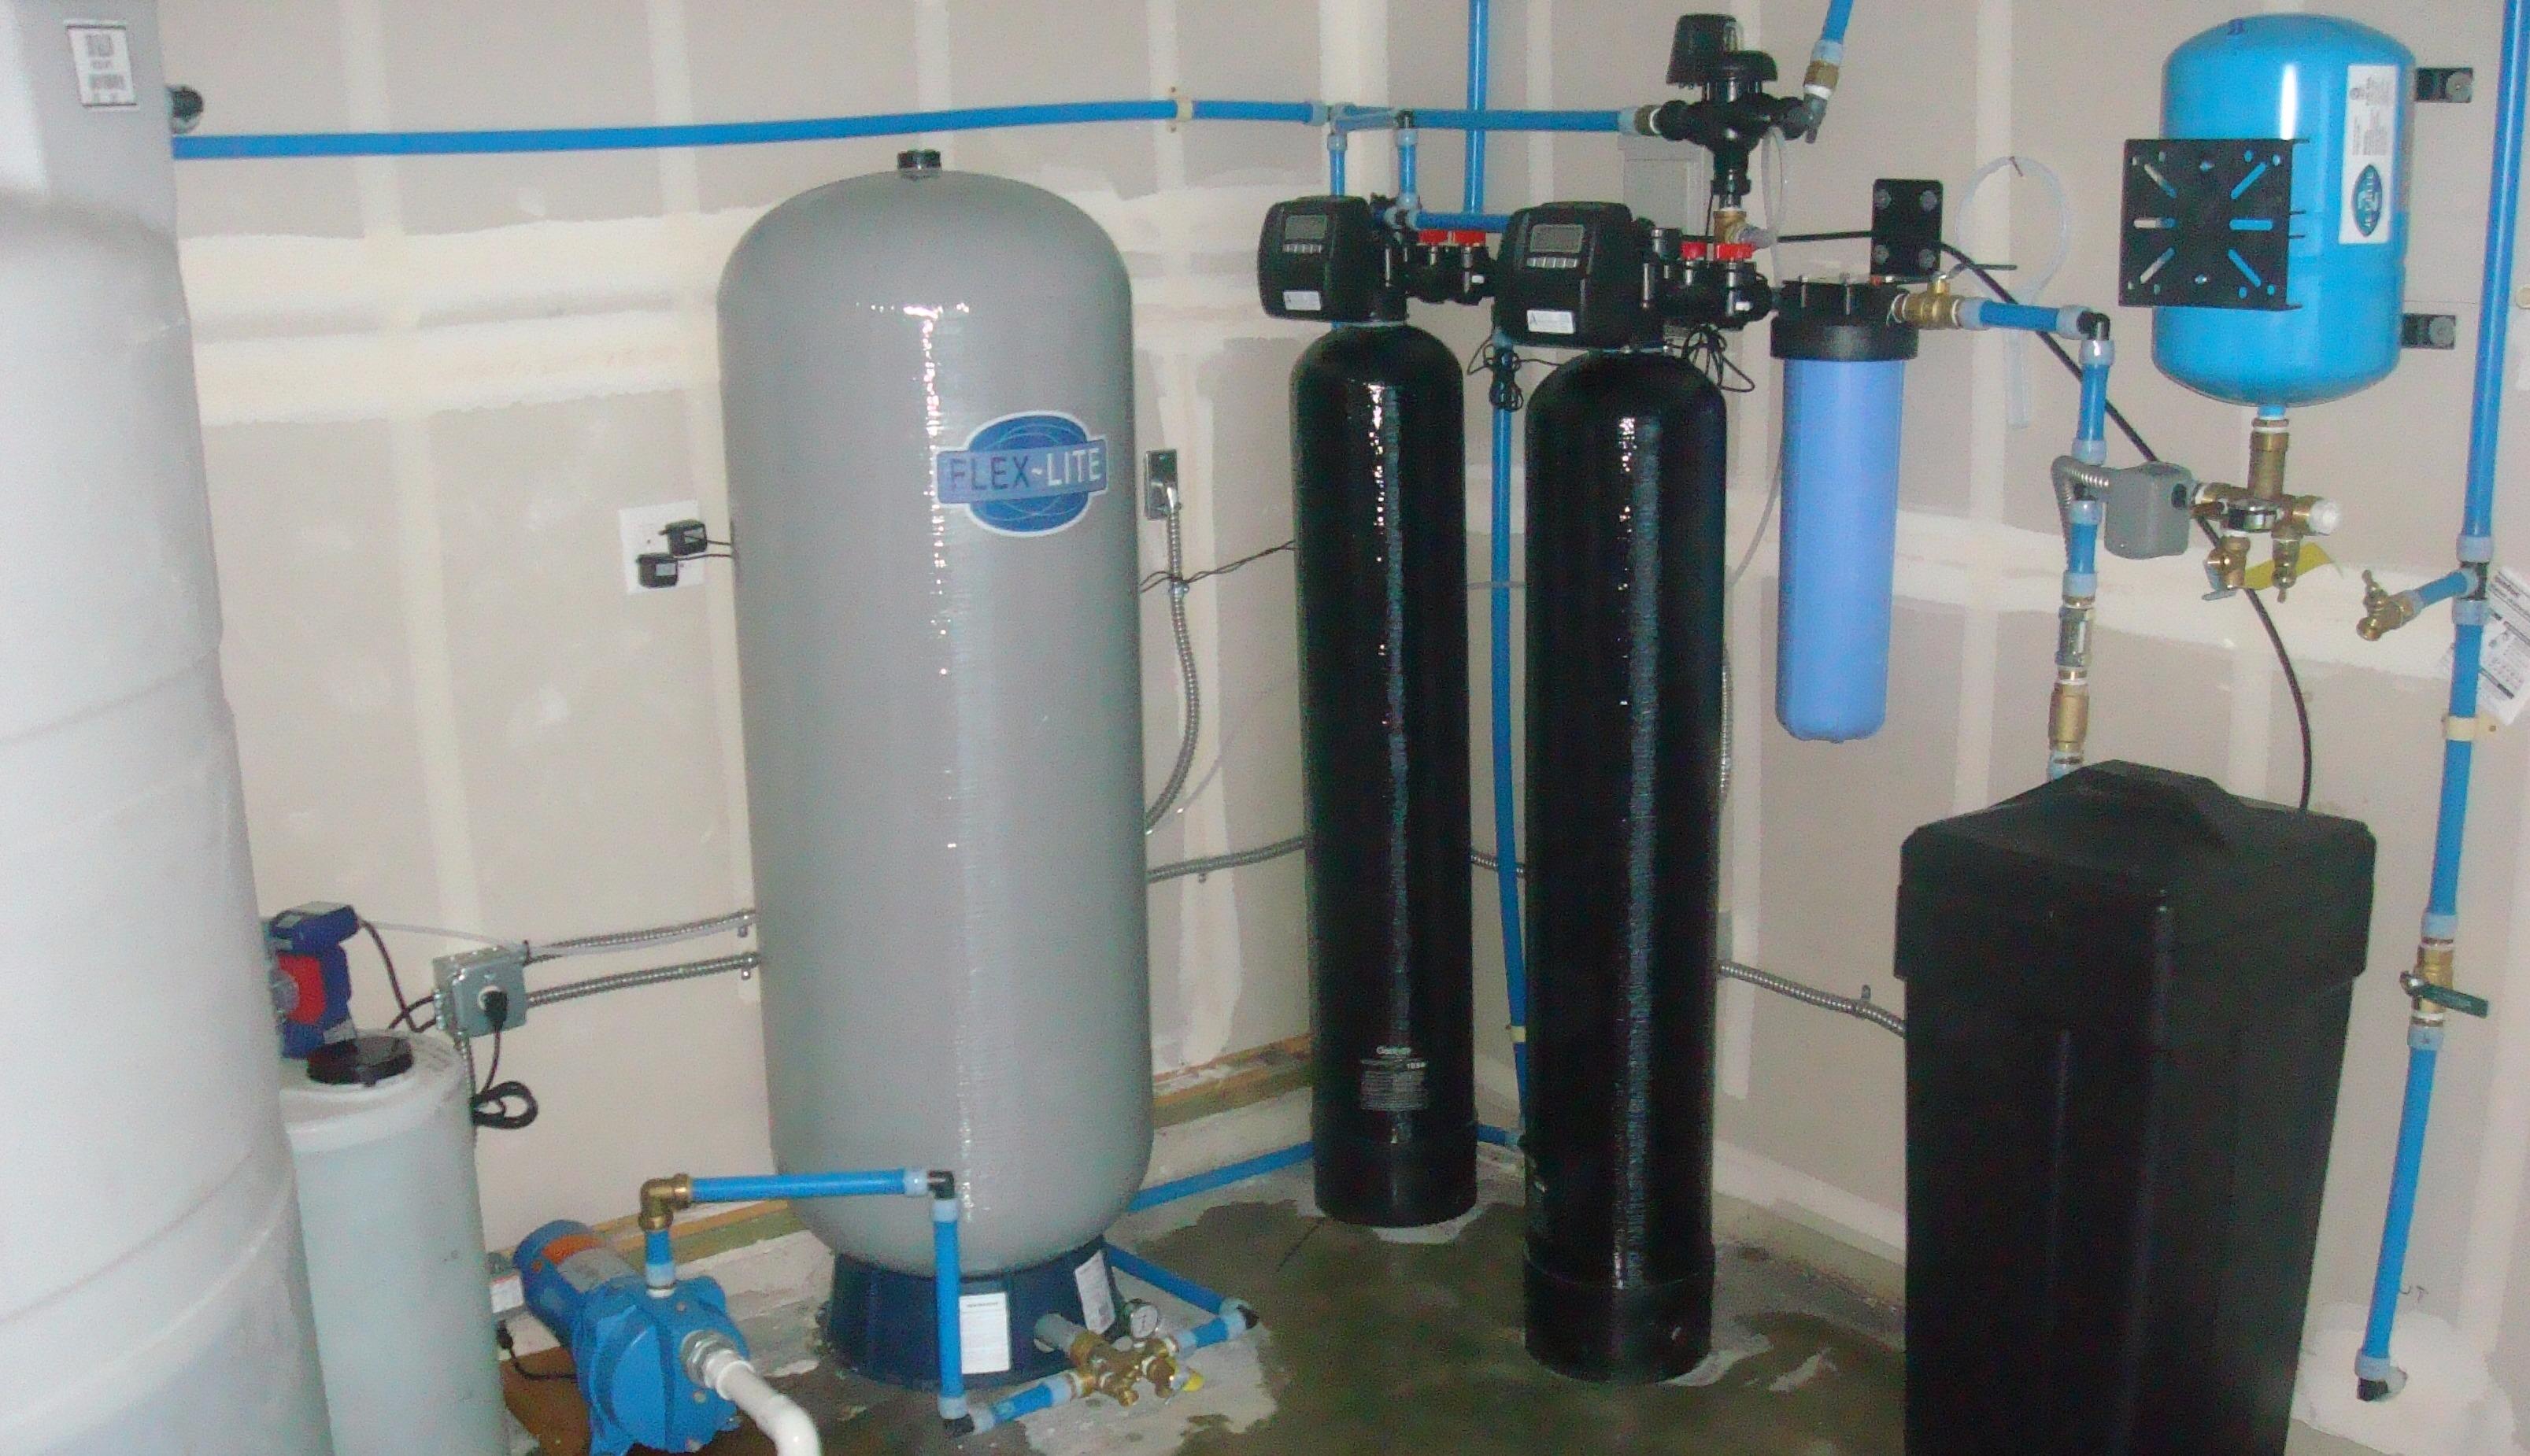 Complete water system to eliminate staining and water odors.